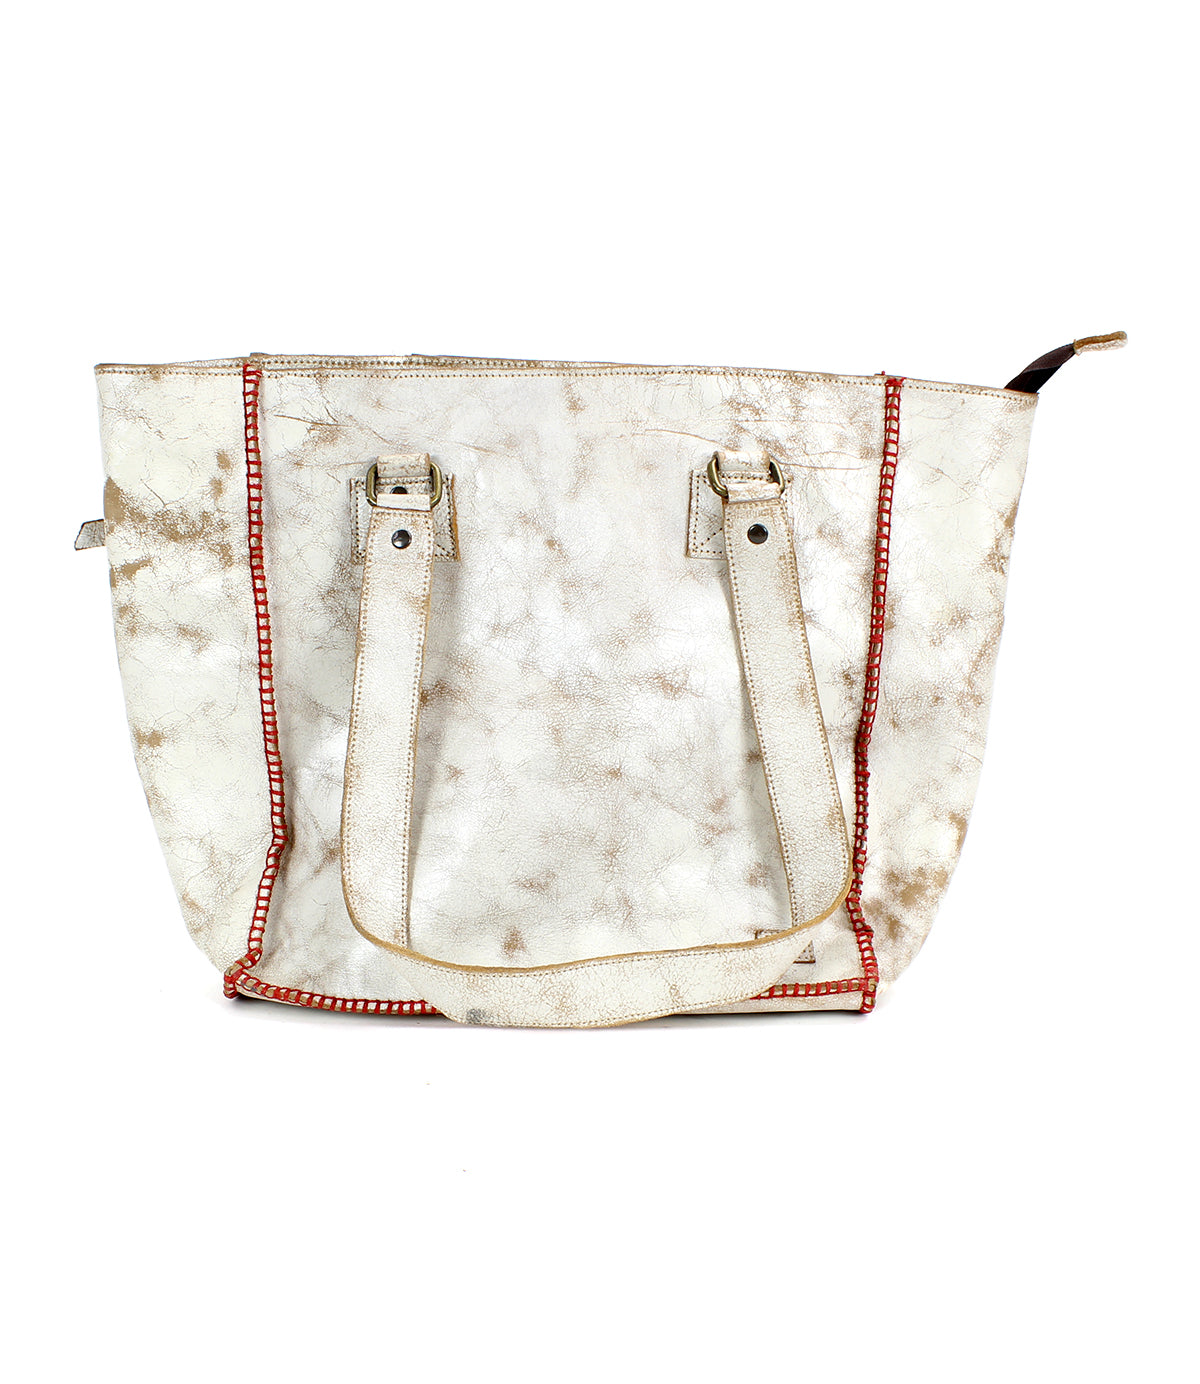 The Bed Stu Celindra LTC white marbled tote bag features red stitched edges, two shoulder straps, and a zip-top closure to secure your essentials. Spacious enough for all your daily needs, this elegant tote combines style and functionality effortlessly.